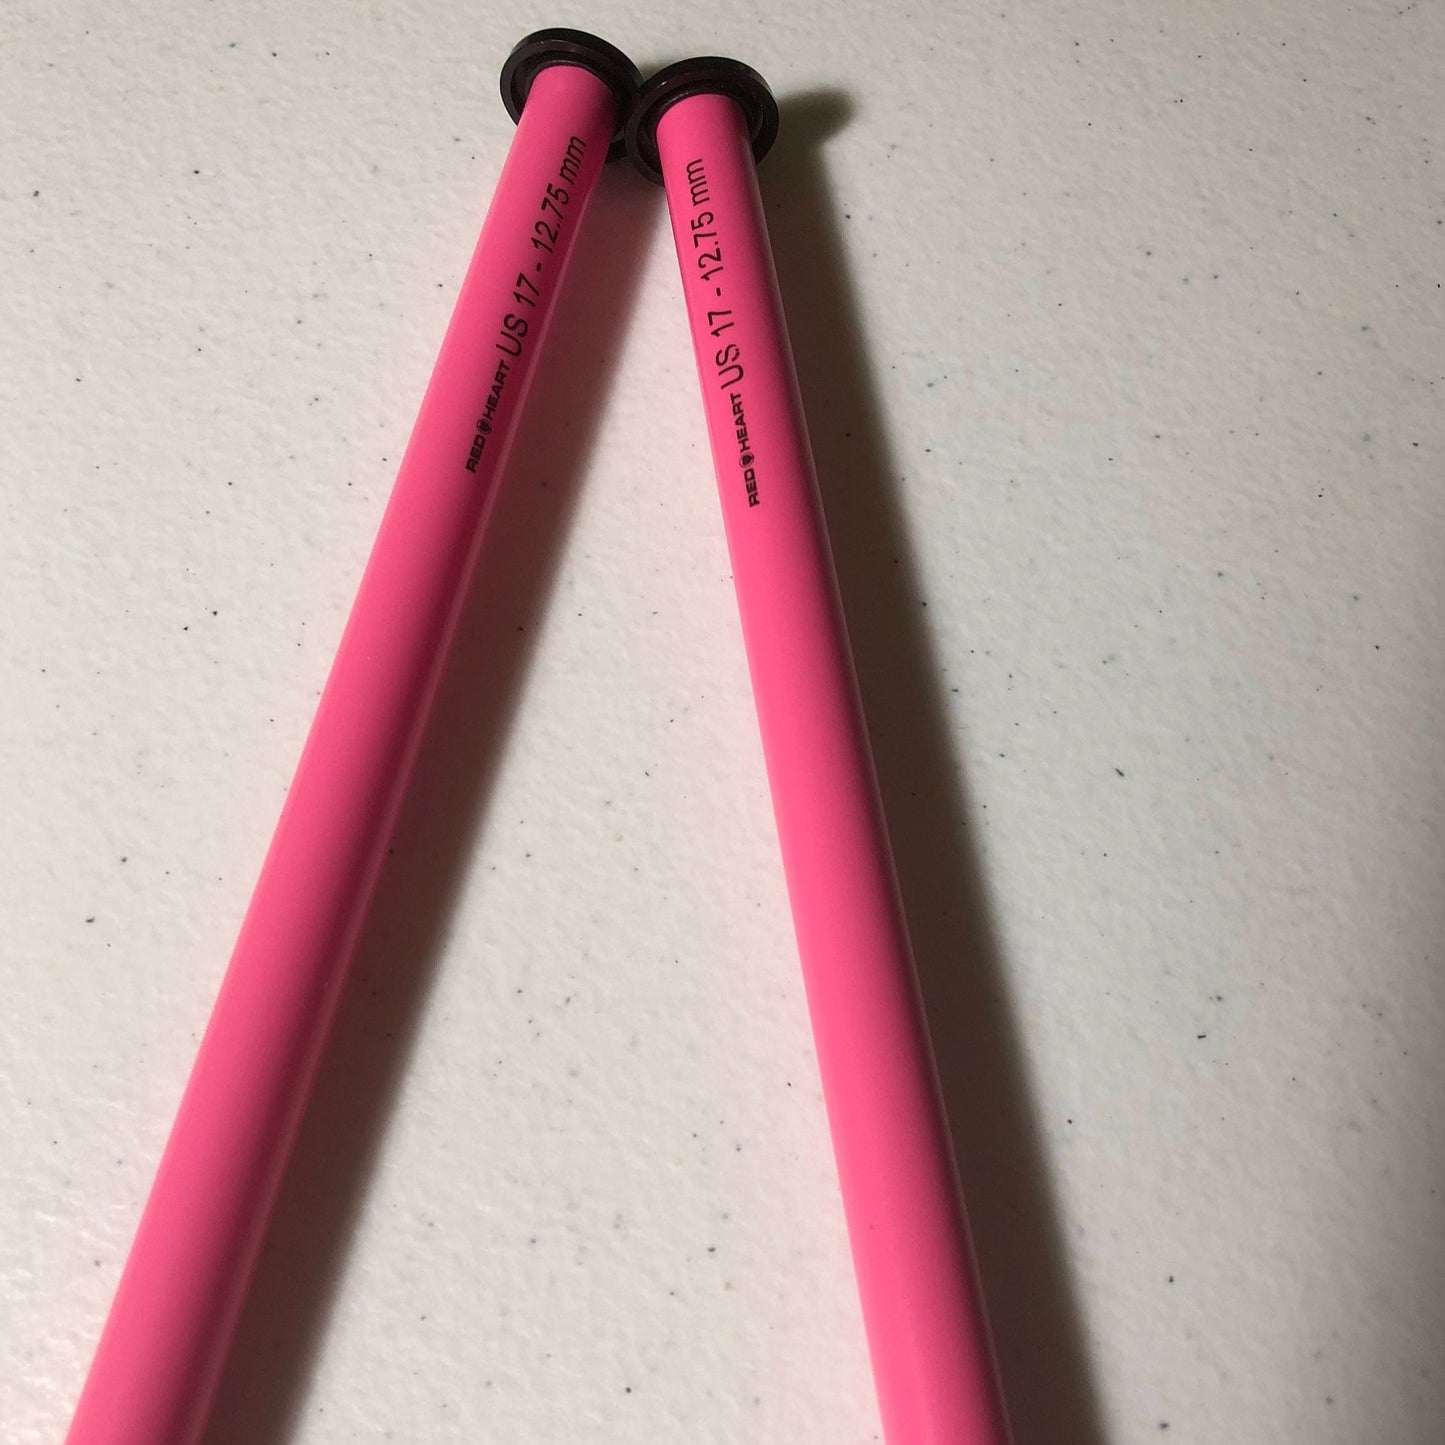 Pair of Red Heart Pink Plastic Knitting Needles 12.75 mm US 17